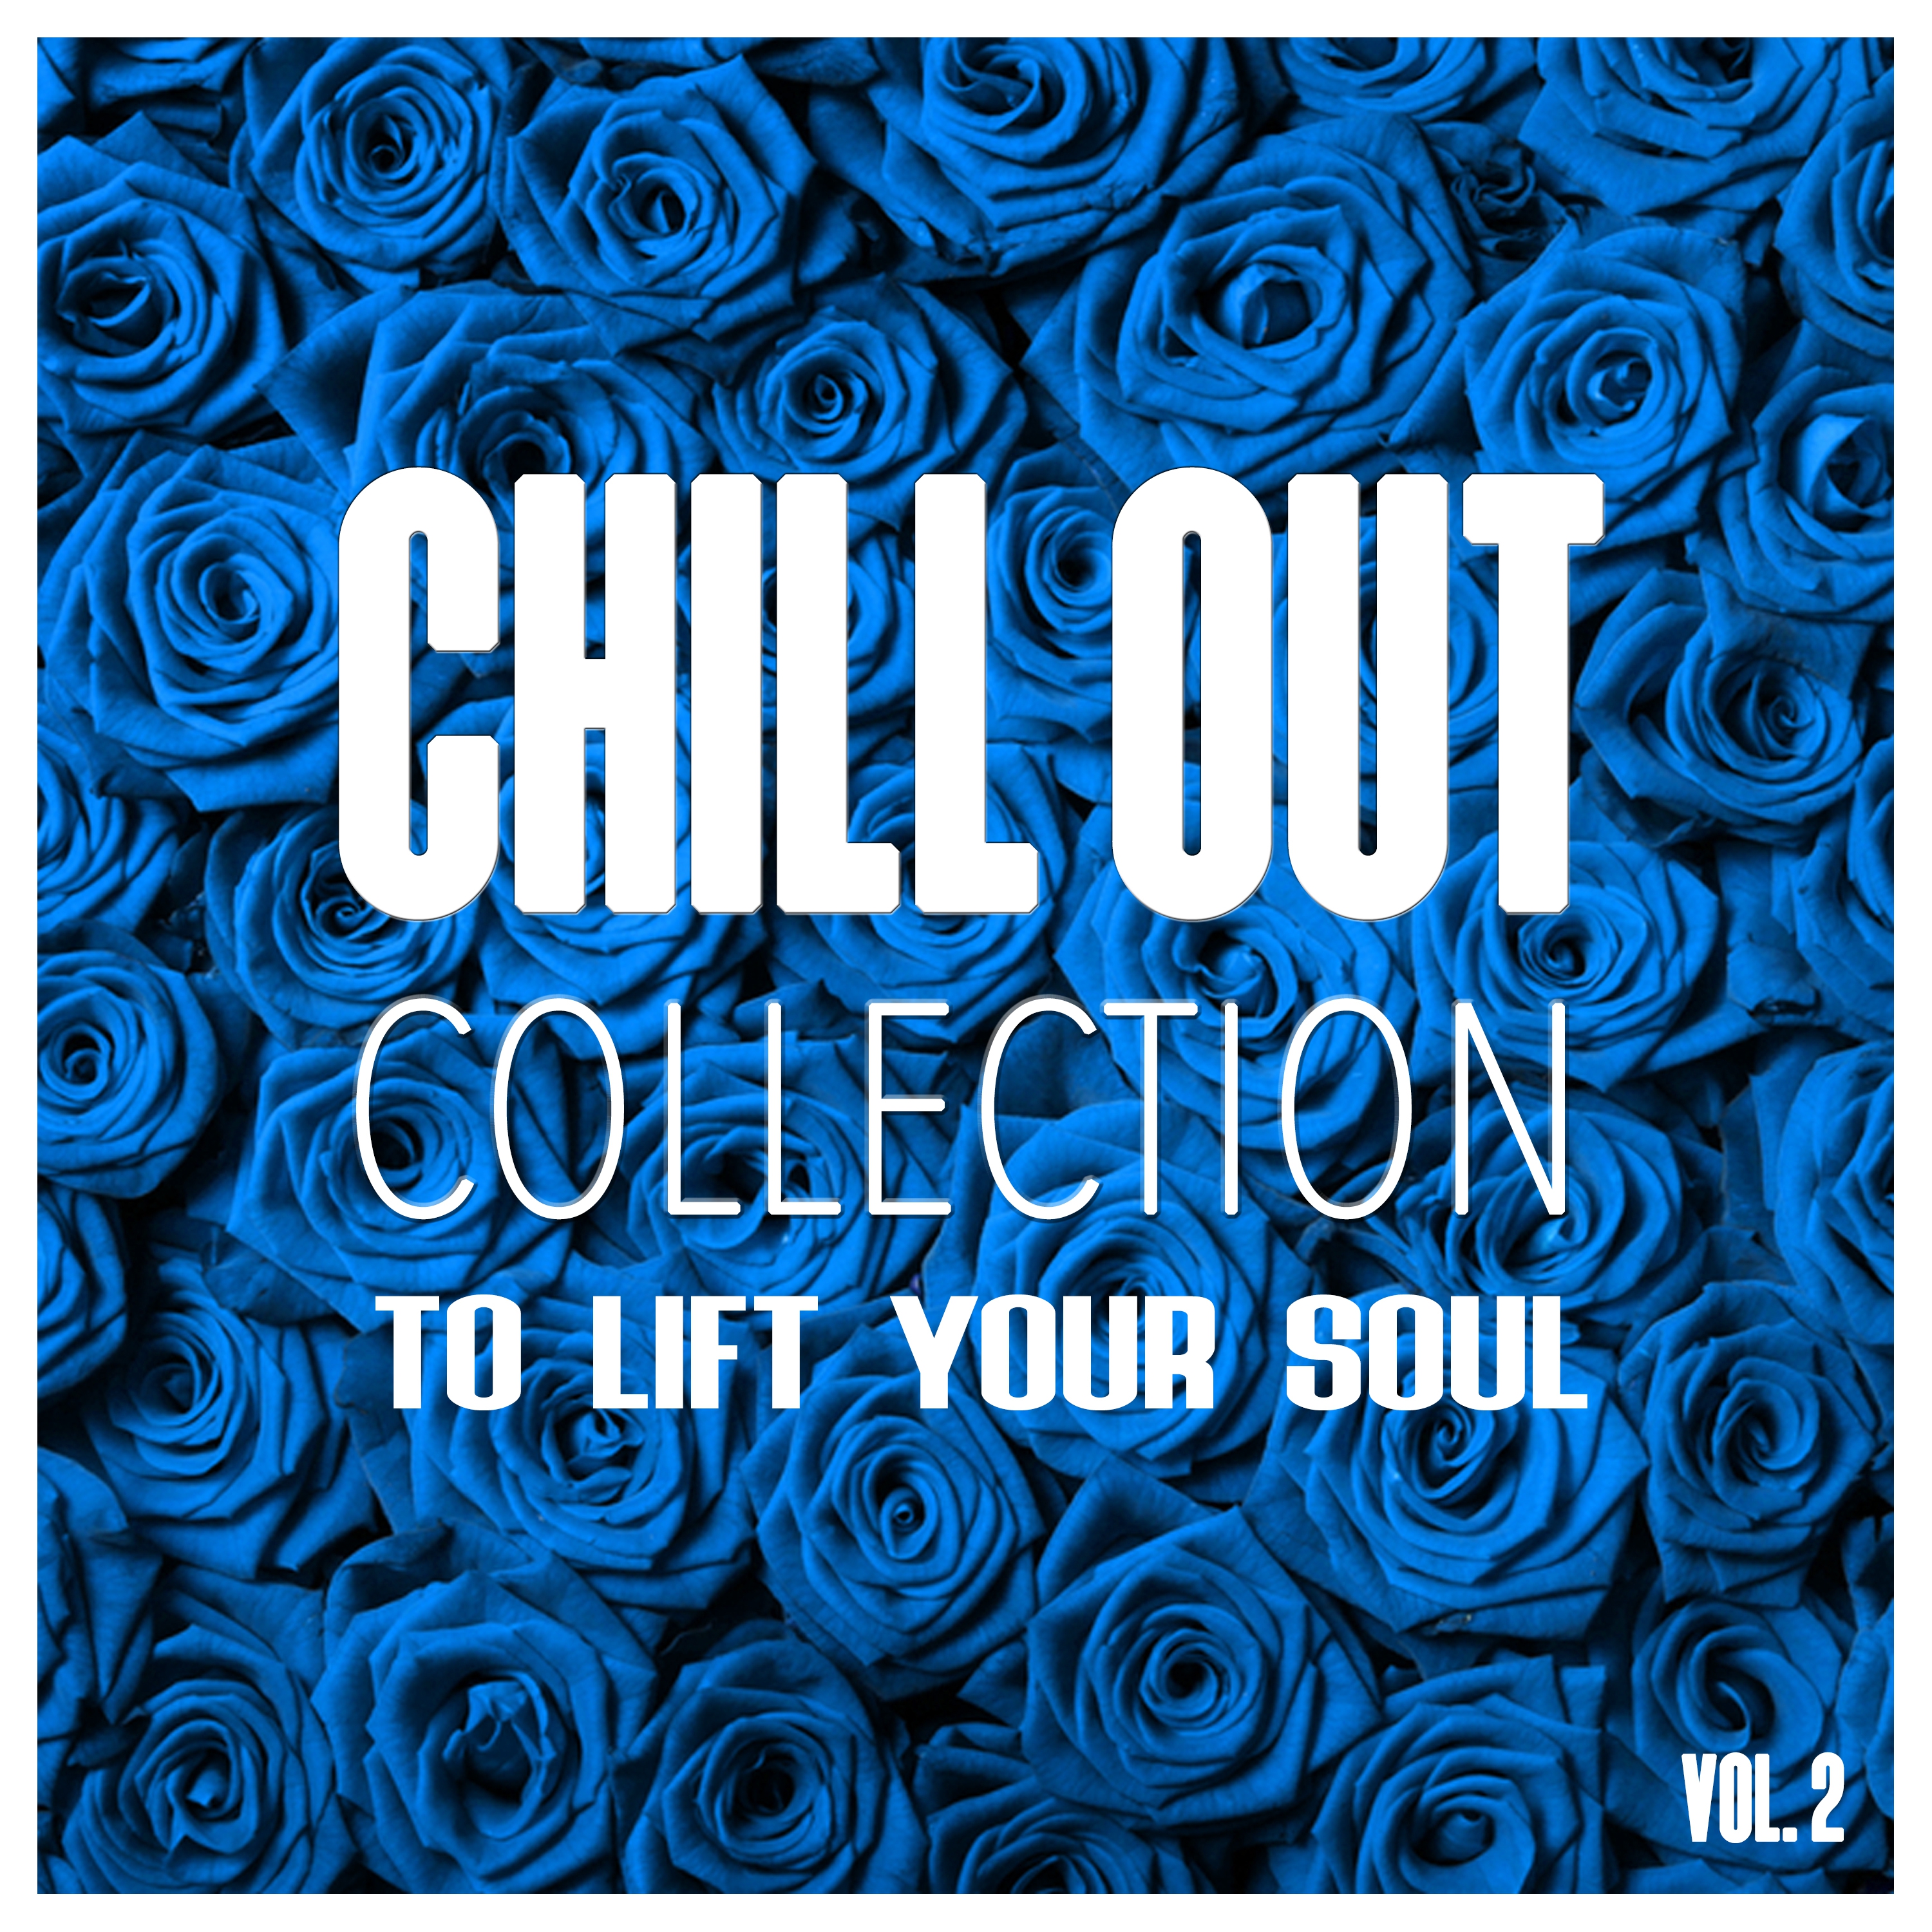 Chill Out Collection, to Lift Your Soul, Vol. 2